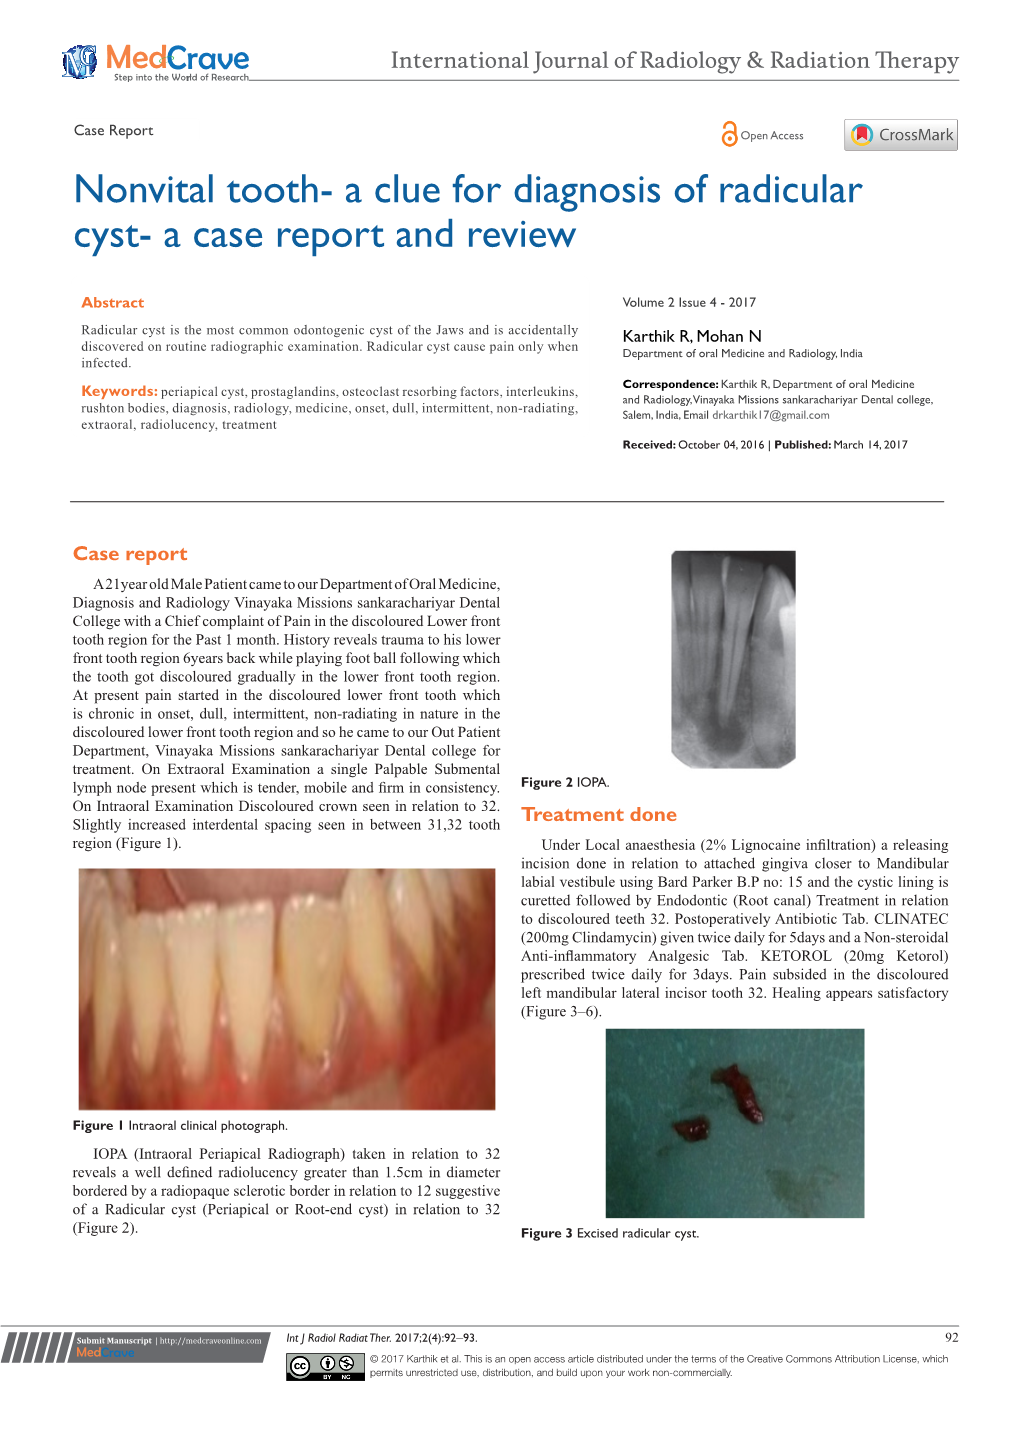 Nonvital Tooth- a Clue for Diagnosis of Radicular Cyst- a Case Report and Review